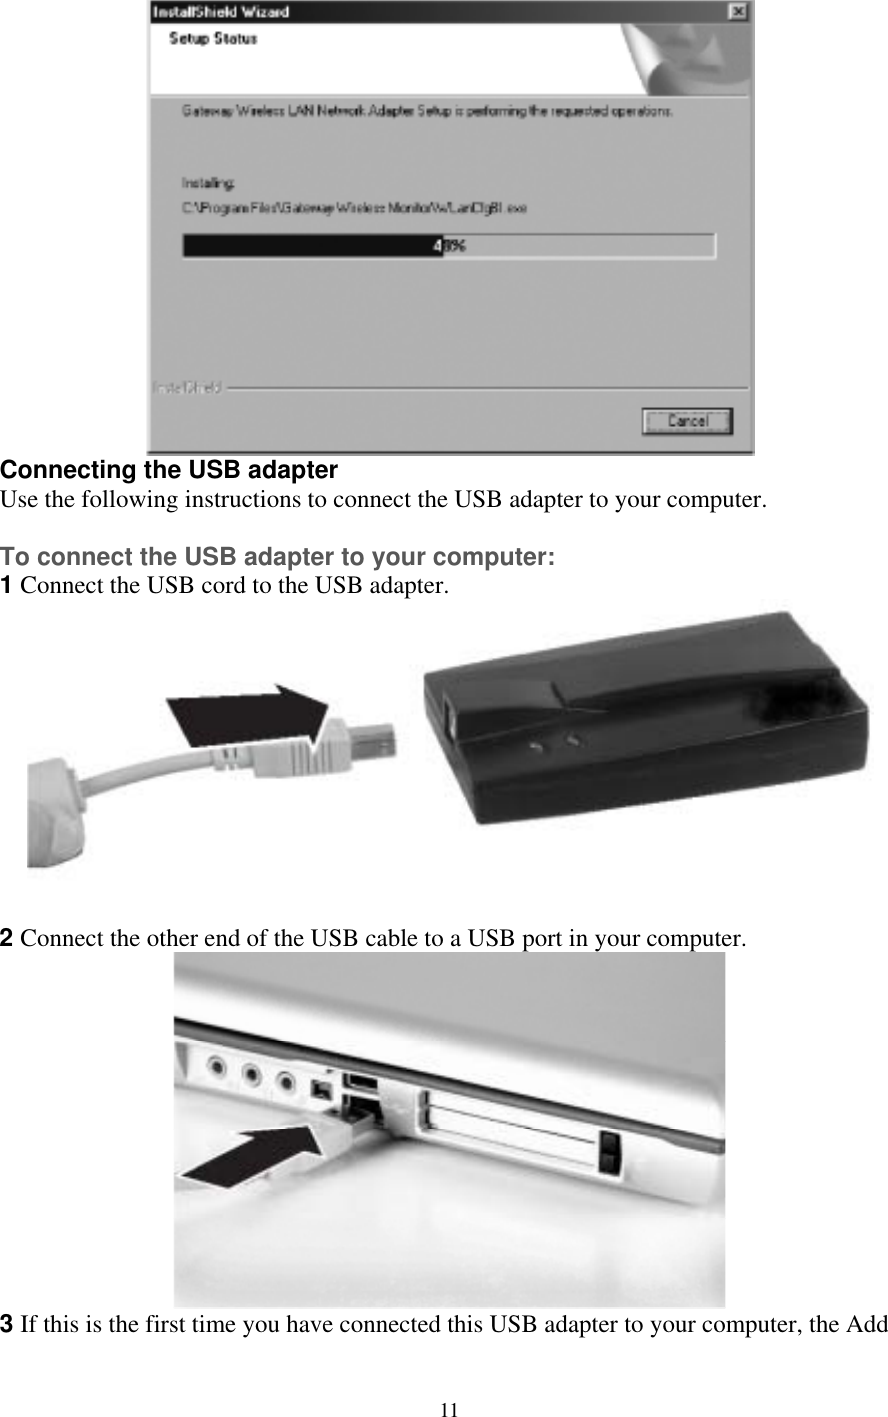  Connecting the USB adapter Use the following instructions to connect the USB adapter to your computer.  To connect the USB adapter to your computer: 1 Connect the USB cord to the USB adapter.   2 Connect the other end of the USB cable to a USB port in your computer.  3 If this is the first time you have connected this USB adapter to your computer, the Add  11